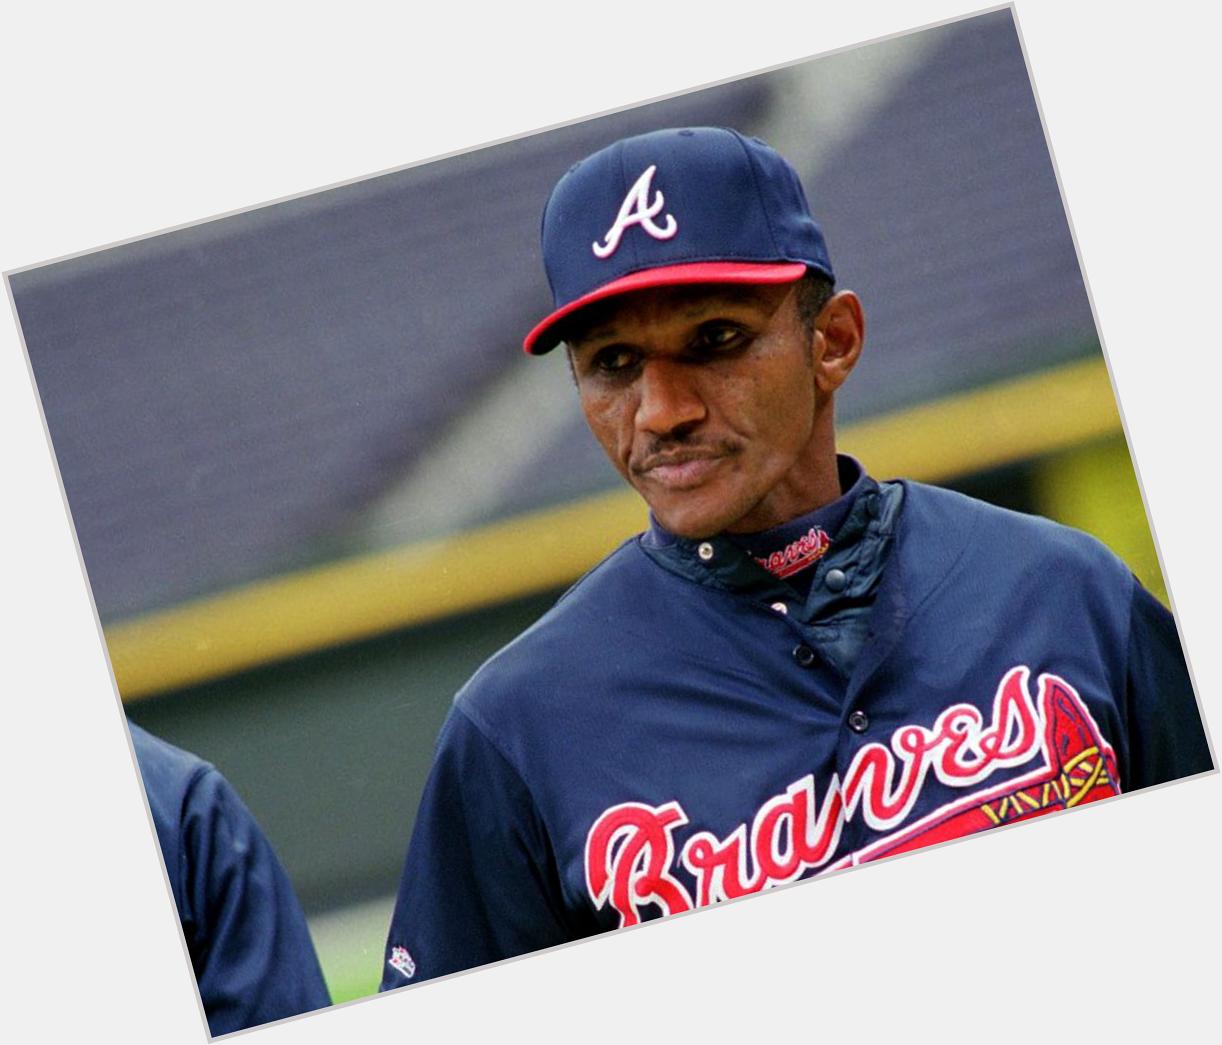 Happy Birthday to Otis Nixon! One of the most handsome players in Atlanta Braves history. 